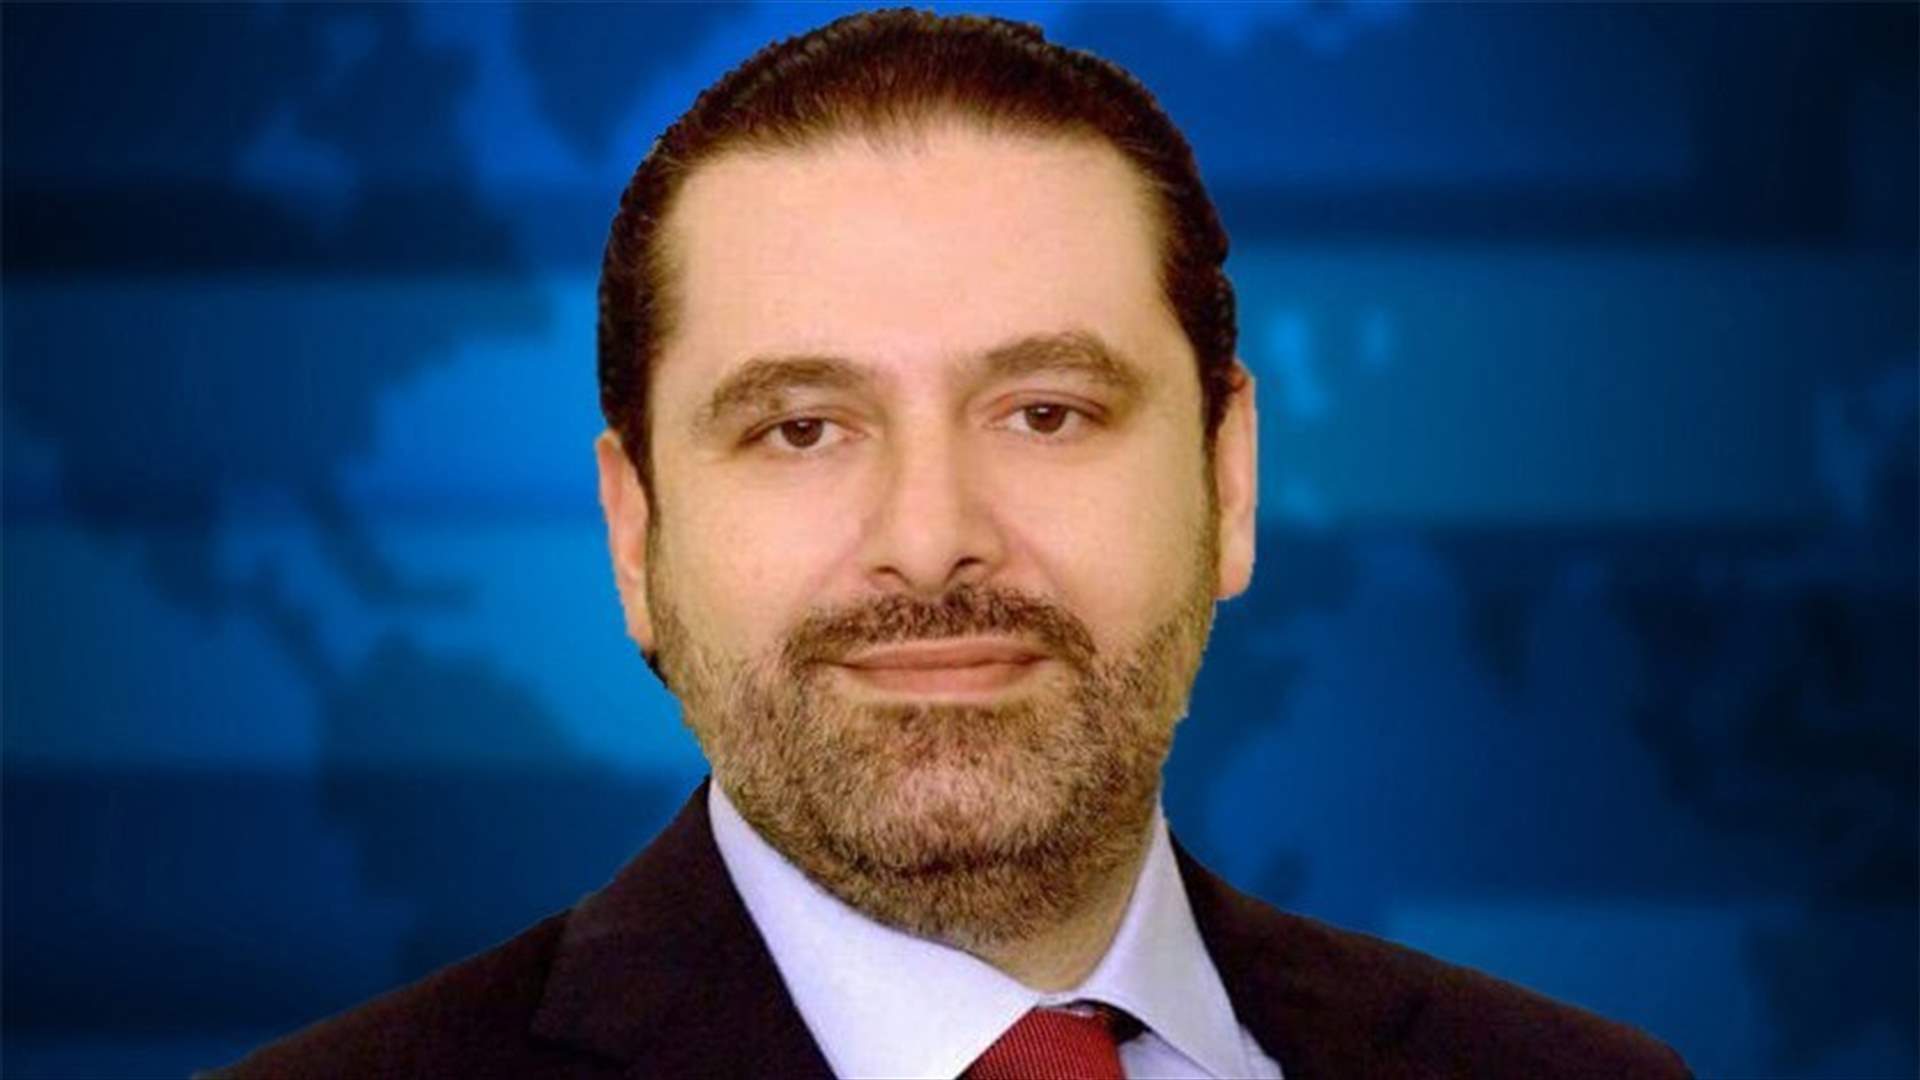 Hariri calls Lavrov, says Lebanon counts on Russian role to avoid further escalation and tension